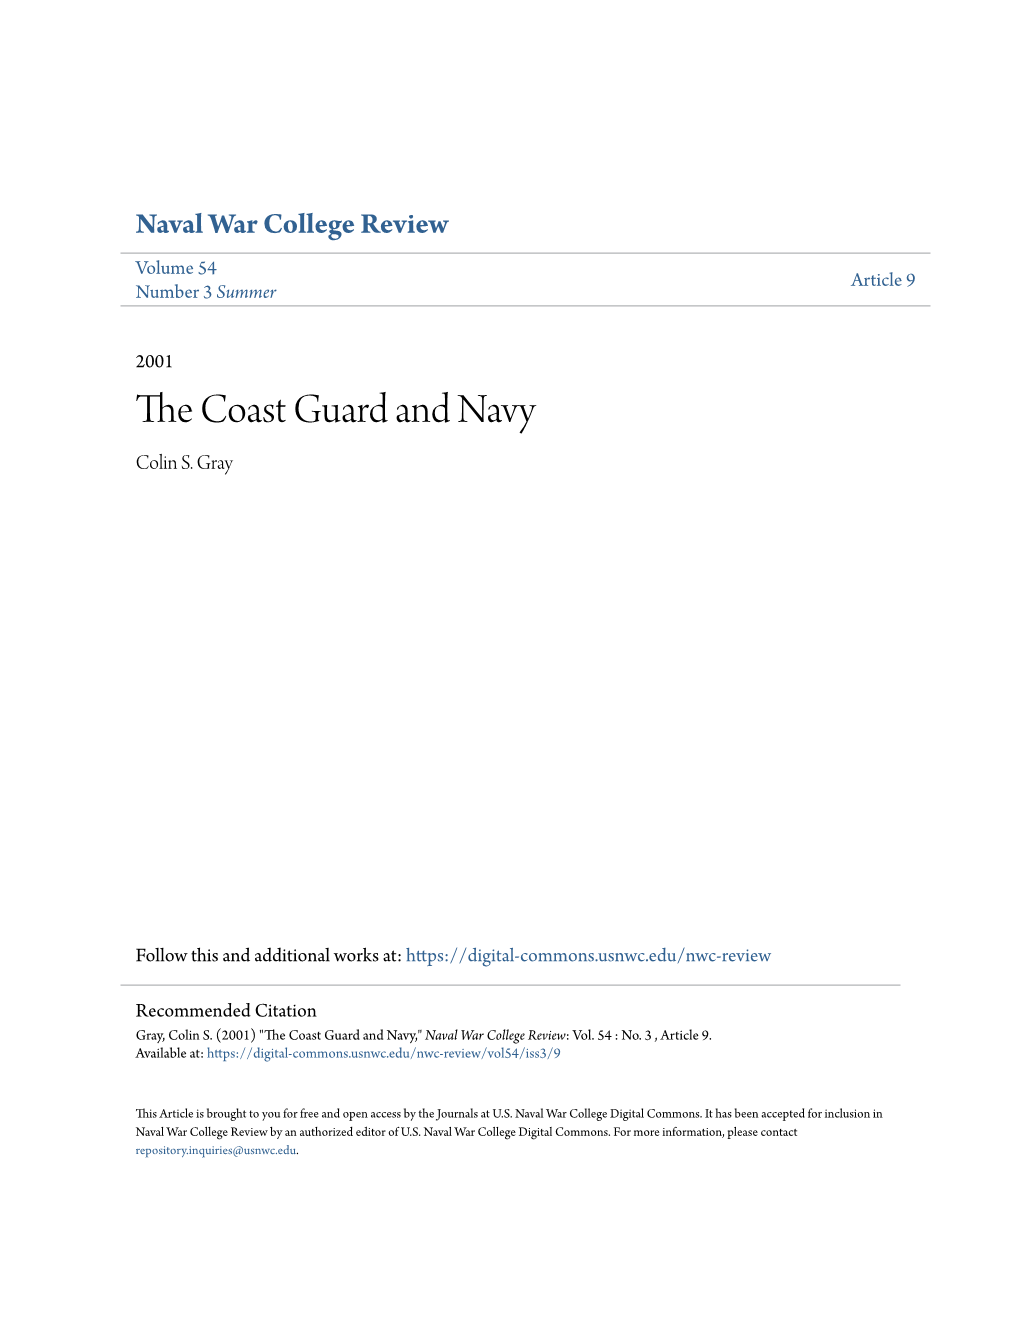 The Coast Guard and Navy